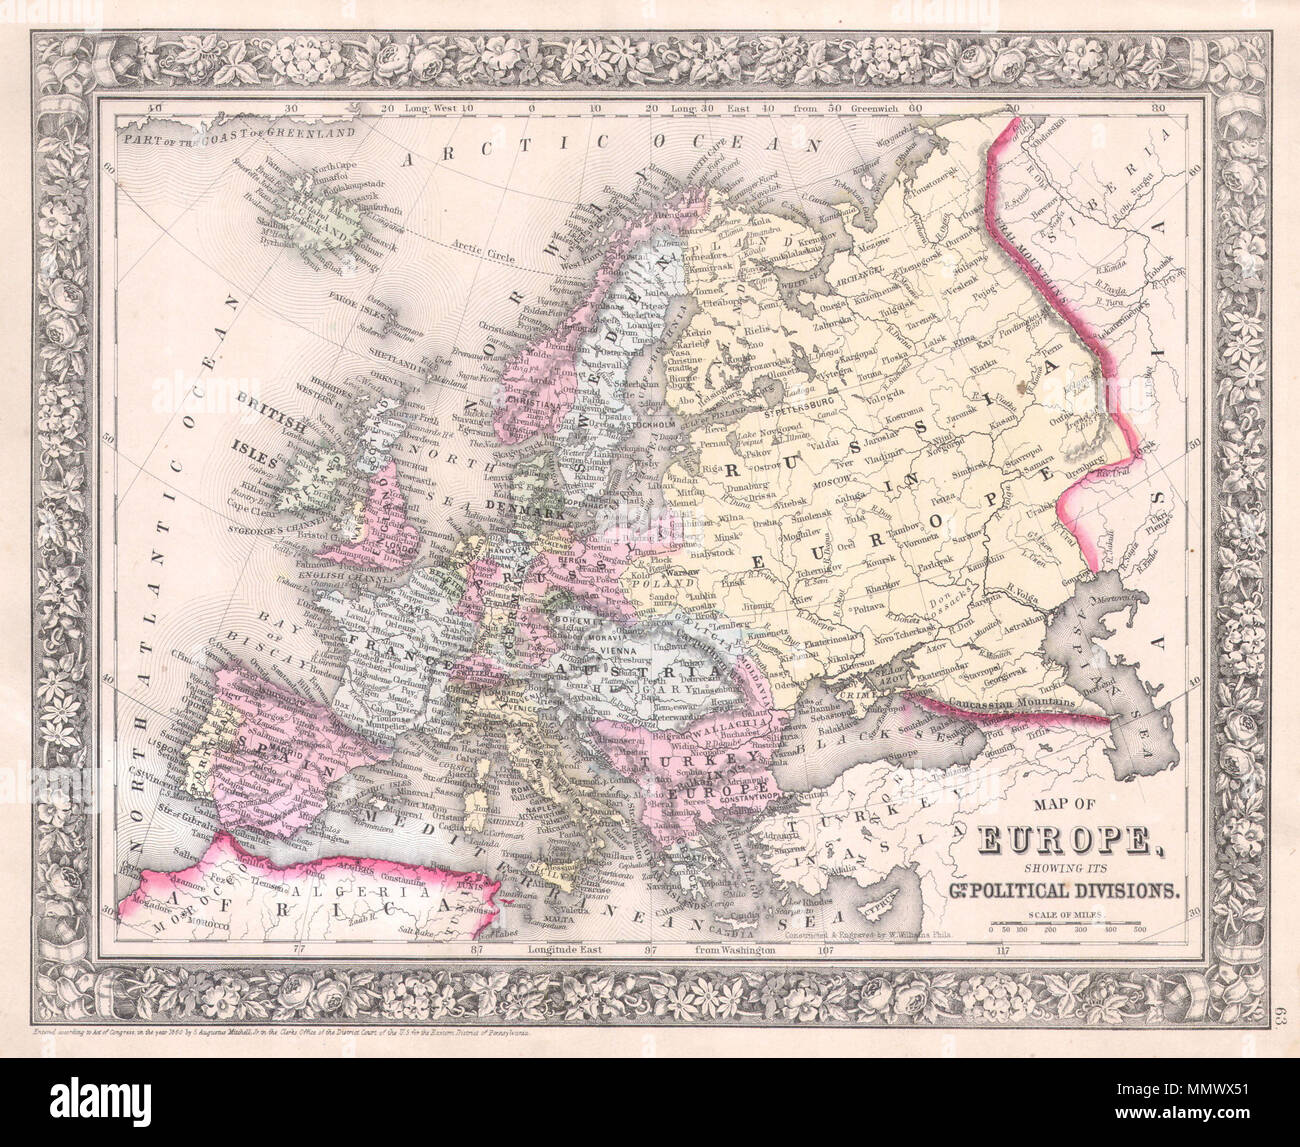 .  English: A beautiful example of S. A. Mitchell Jr.’s 1864 map of Europe. Depicts all of Europe including Iceland. Extends eastwards as far as the Ural Mountains and southward to include parts of North Africa and Turkey. Denotes both political and geographical details. One of the most attractive American atlas maps of this region to appear in the mid 19th century. Features the floral border typical of Mitchell maps from the 1860-65 period. Prepared by W. Williams for inclusion as plate no. 64 in the 1864 issue of Mitchell’s New General Atlas . Dated and copyrighted, “Entered according to Act Stock Photo